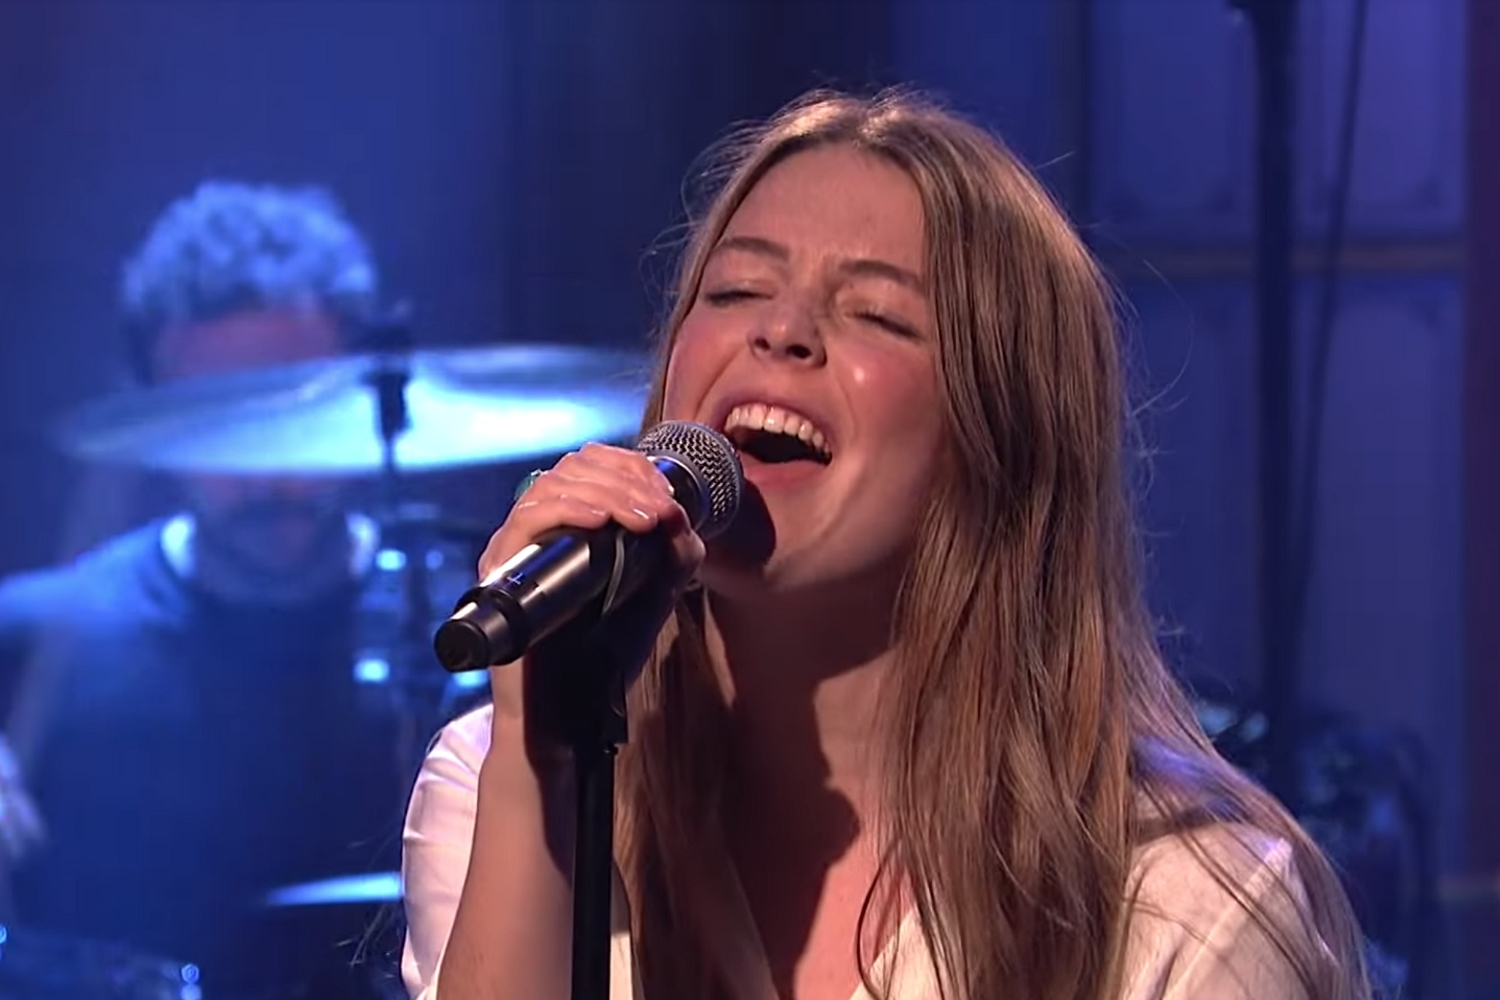 Watch Maggie Rogers bring ‘Light On’ and ‘Fallingwater’ to SNL